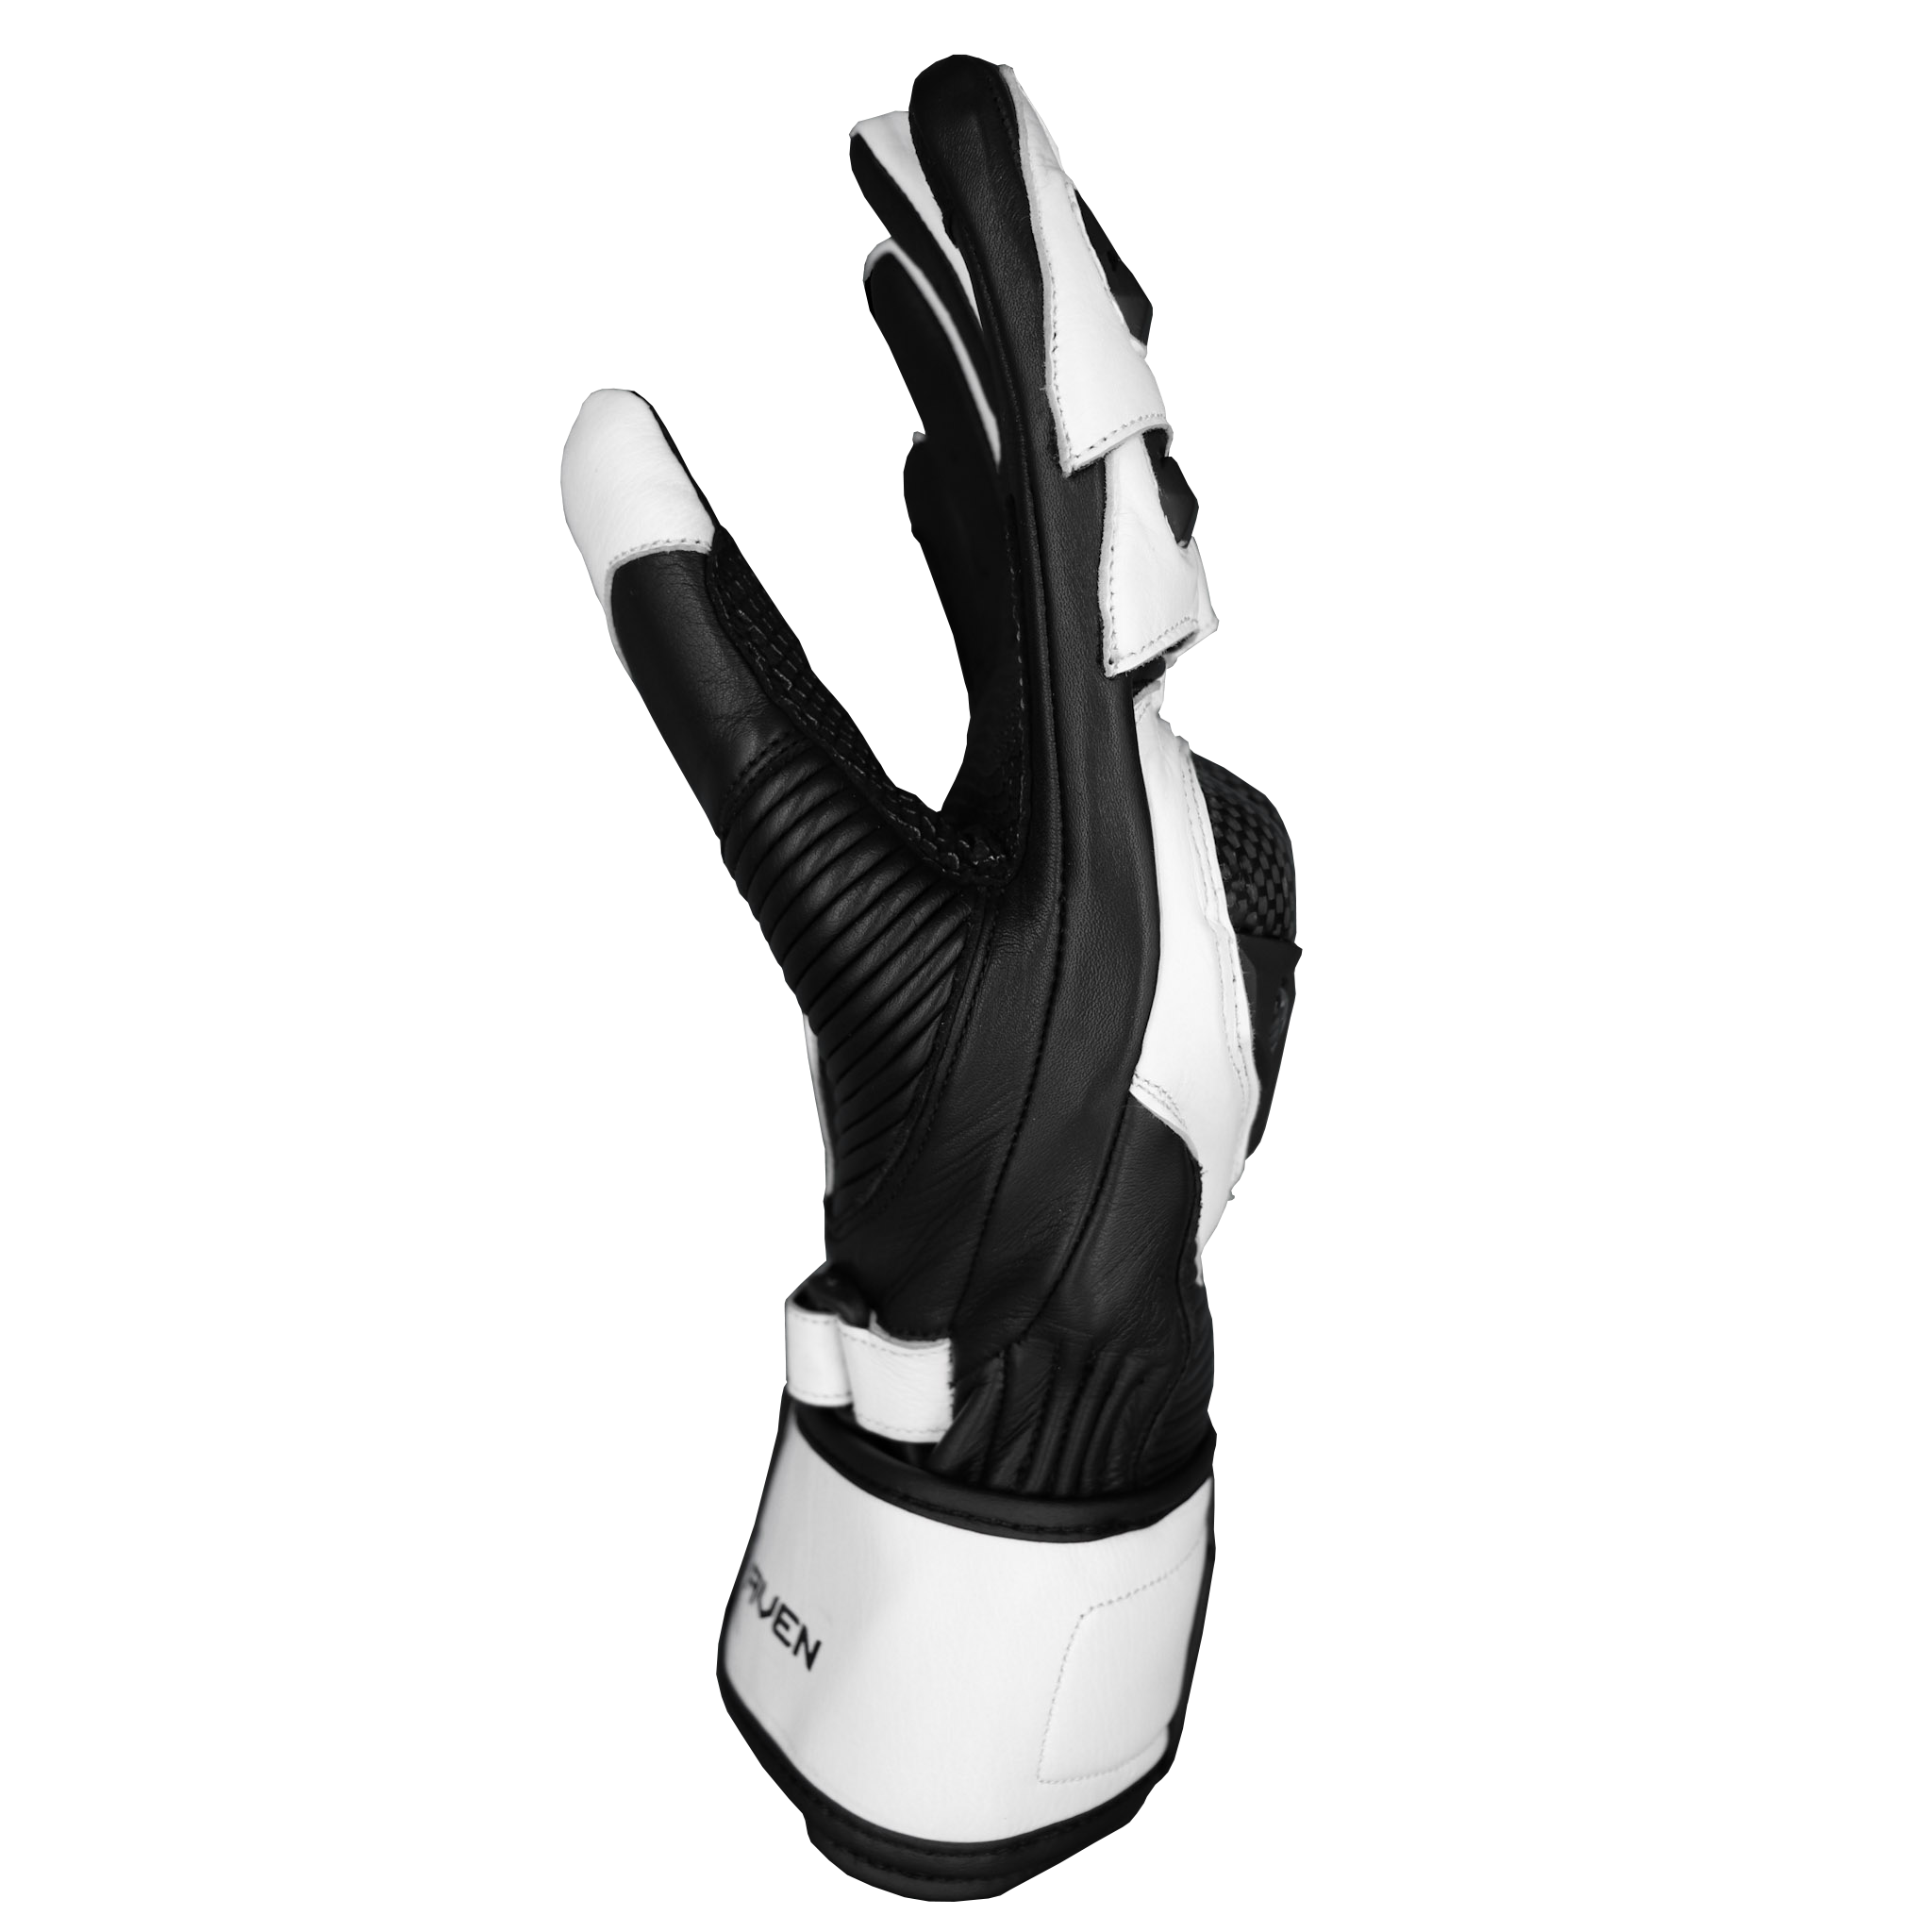 RAVEN Moto STORM - Black and White Leather Motorcycle Long Cuff Gauntlet Gloves